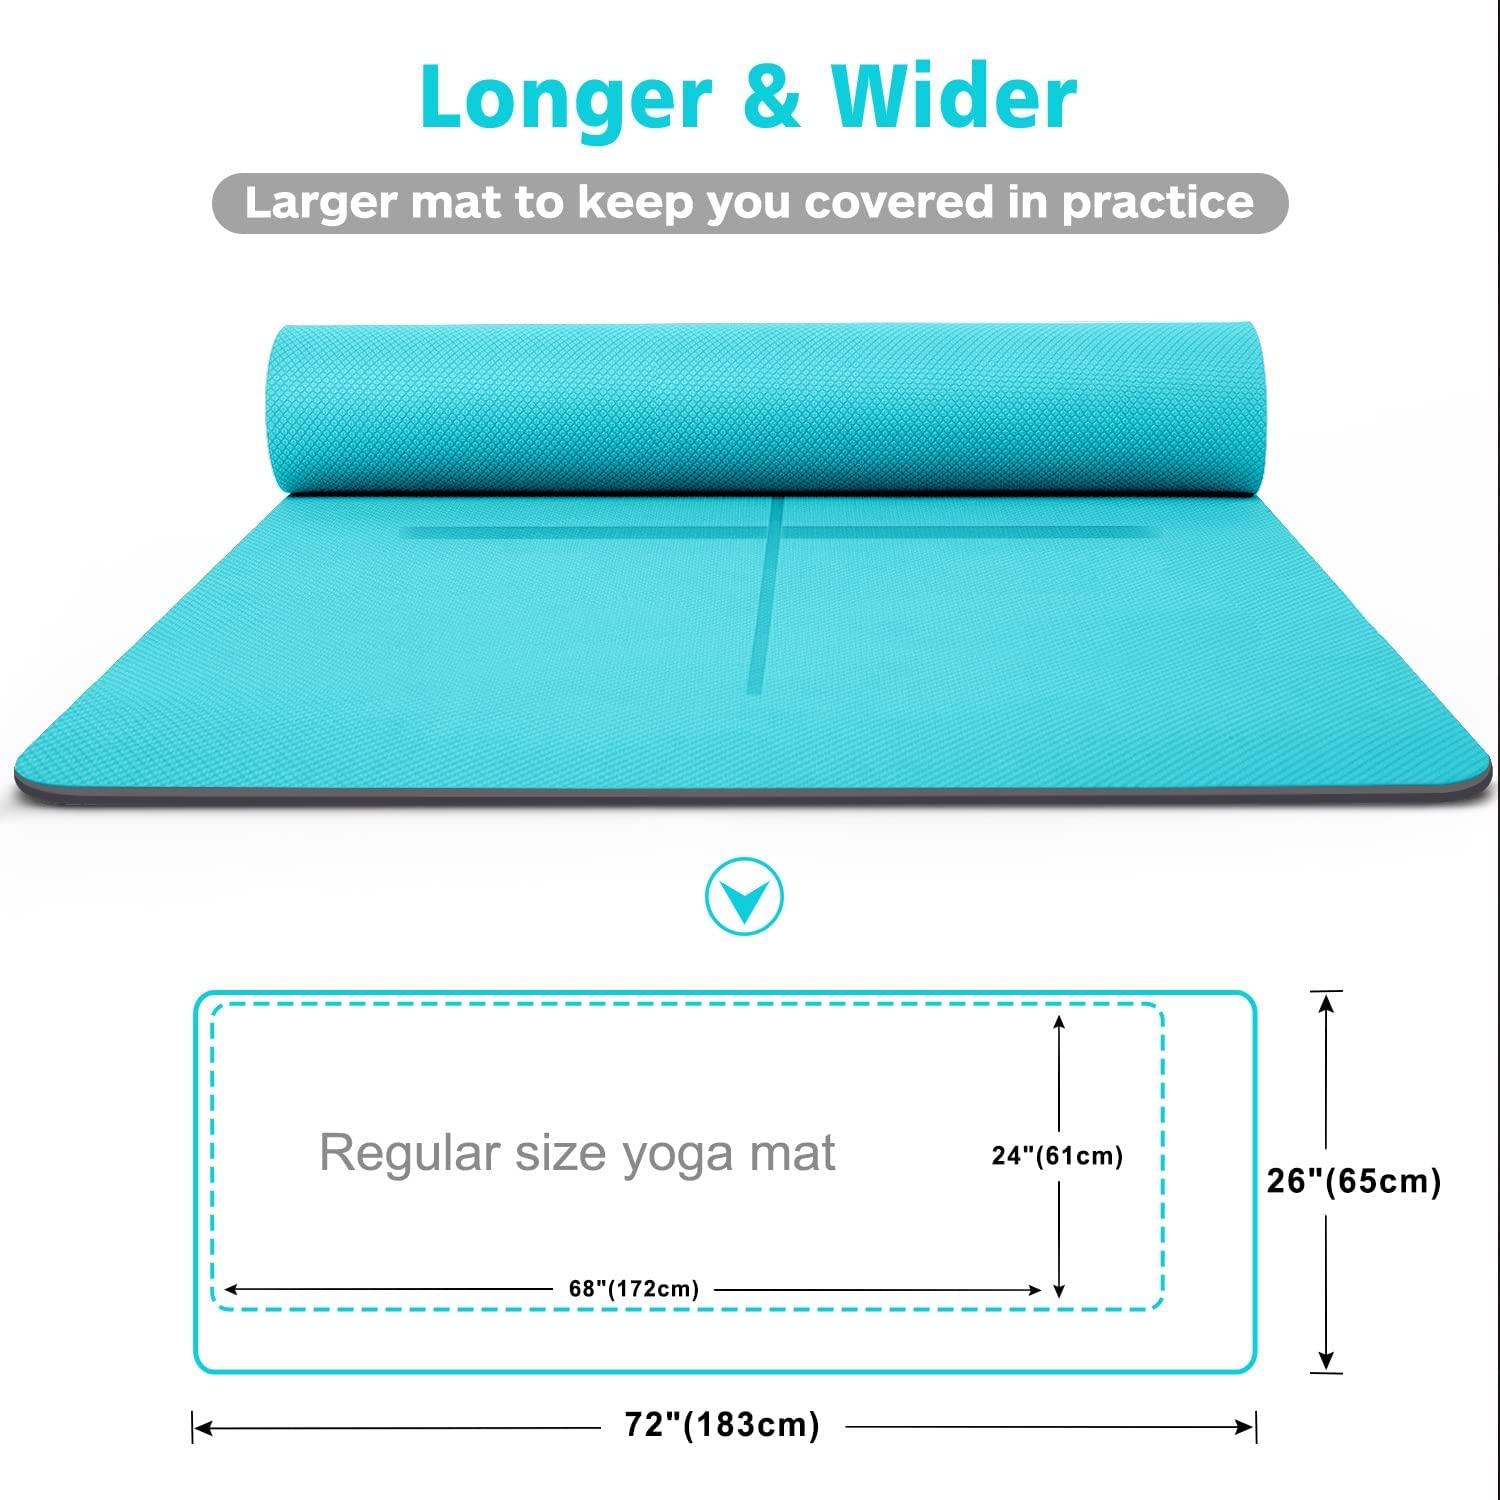 Heathyoga Eco Friendly Non Slip Yoga Mat, Body Alignment System, SGS  Certified TPE Material - Textured Non Slip Surface and Optimal  Cushioning,72x 26 Thickness 1/4 Turquoise